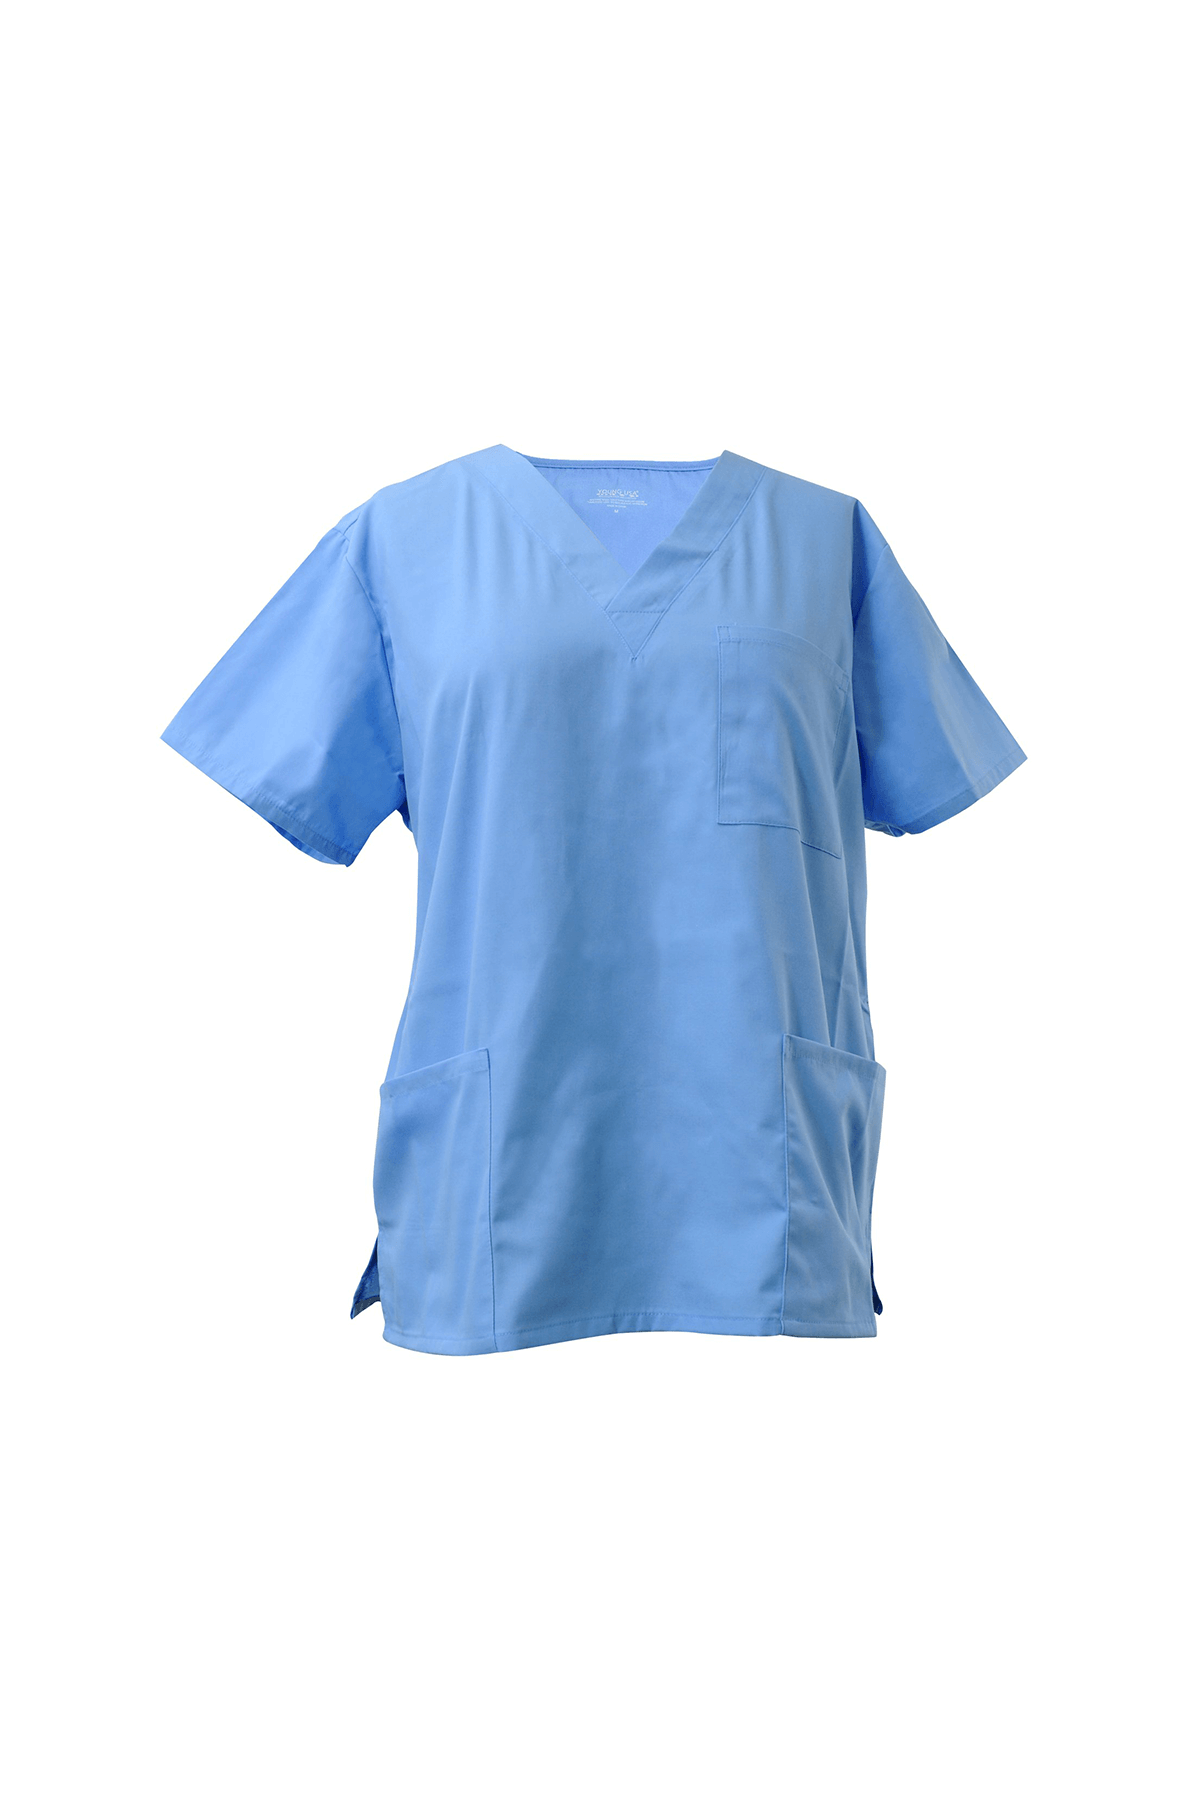 Young USA Adult Scrub Top in Ceil Blue